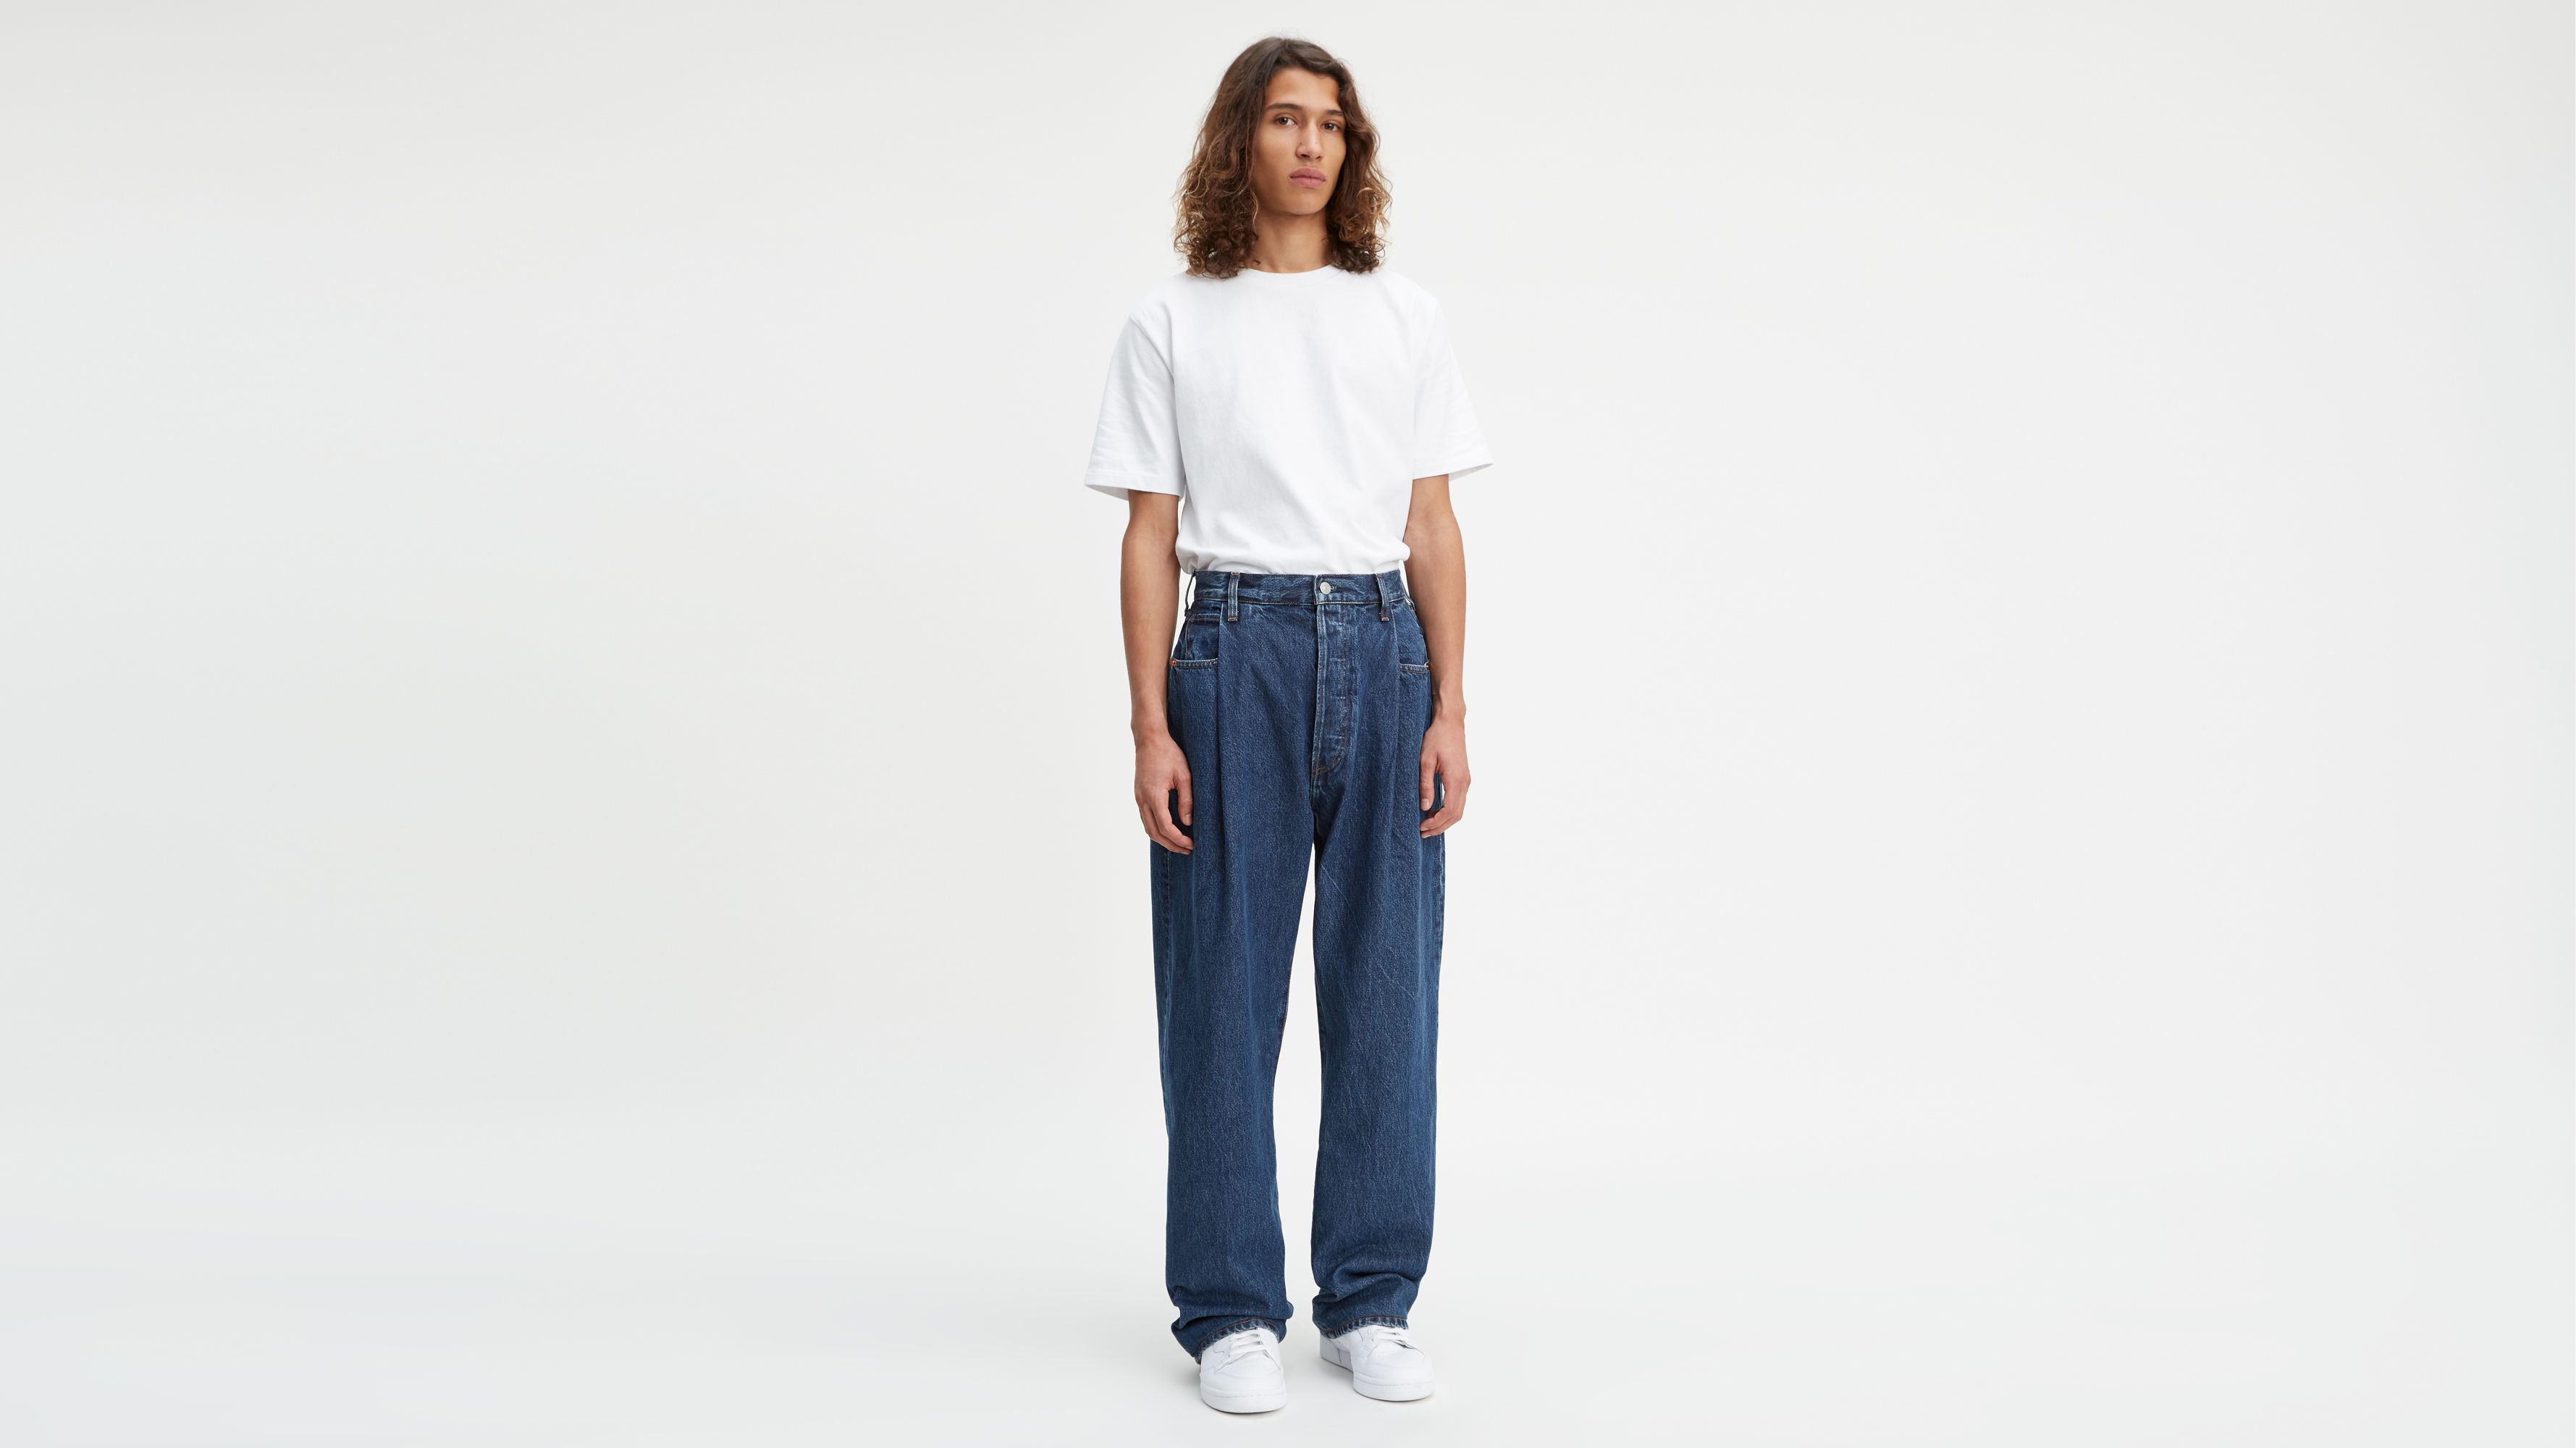 levis 502 shrink to fit